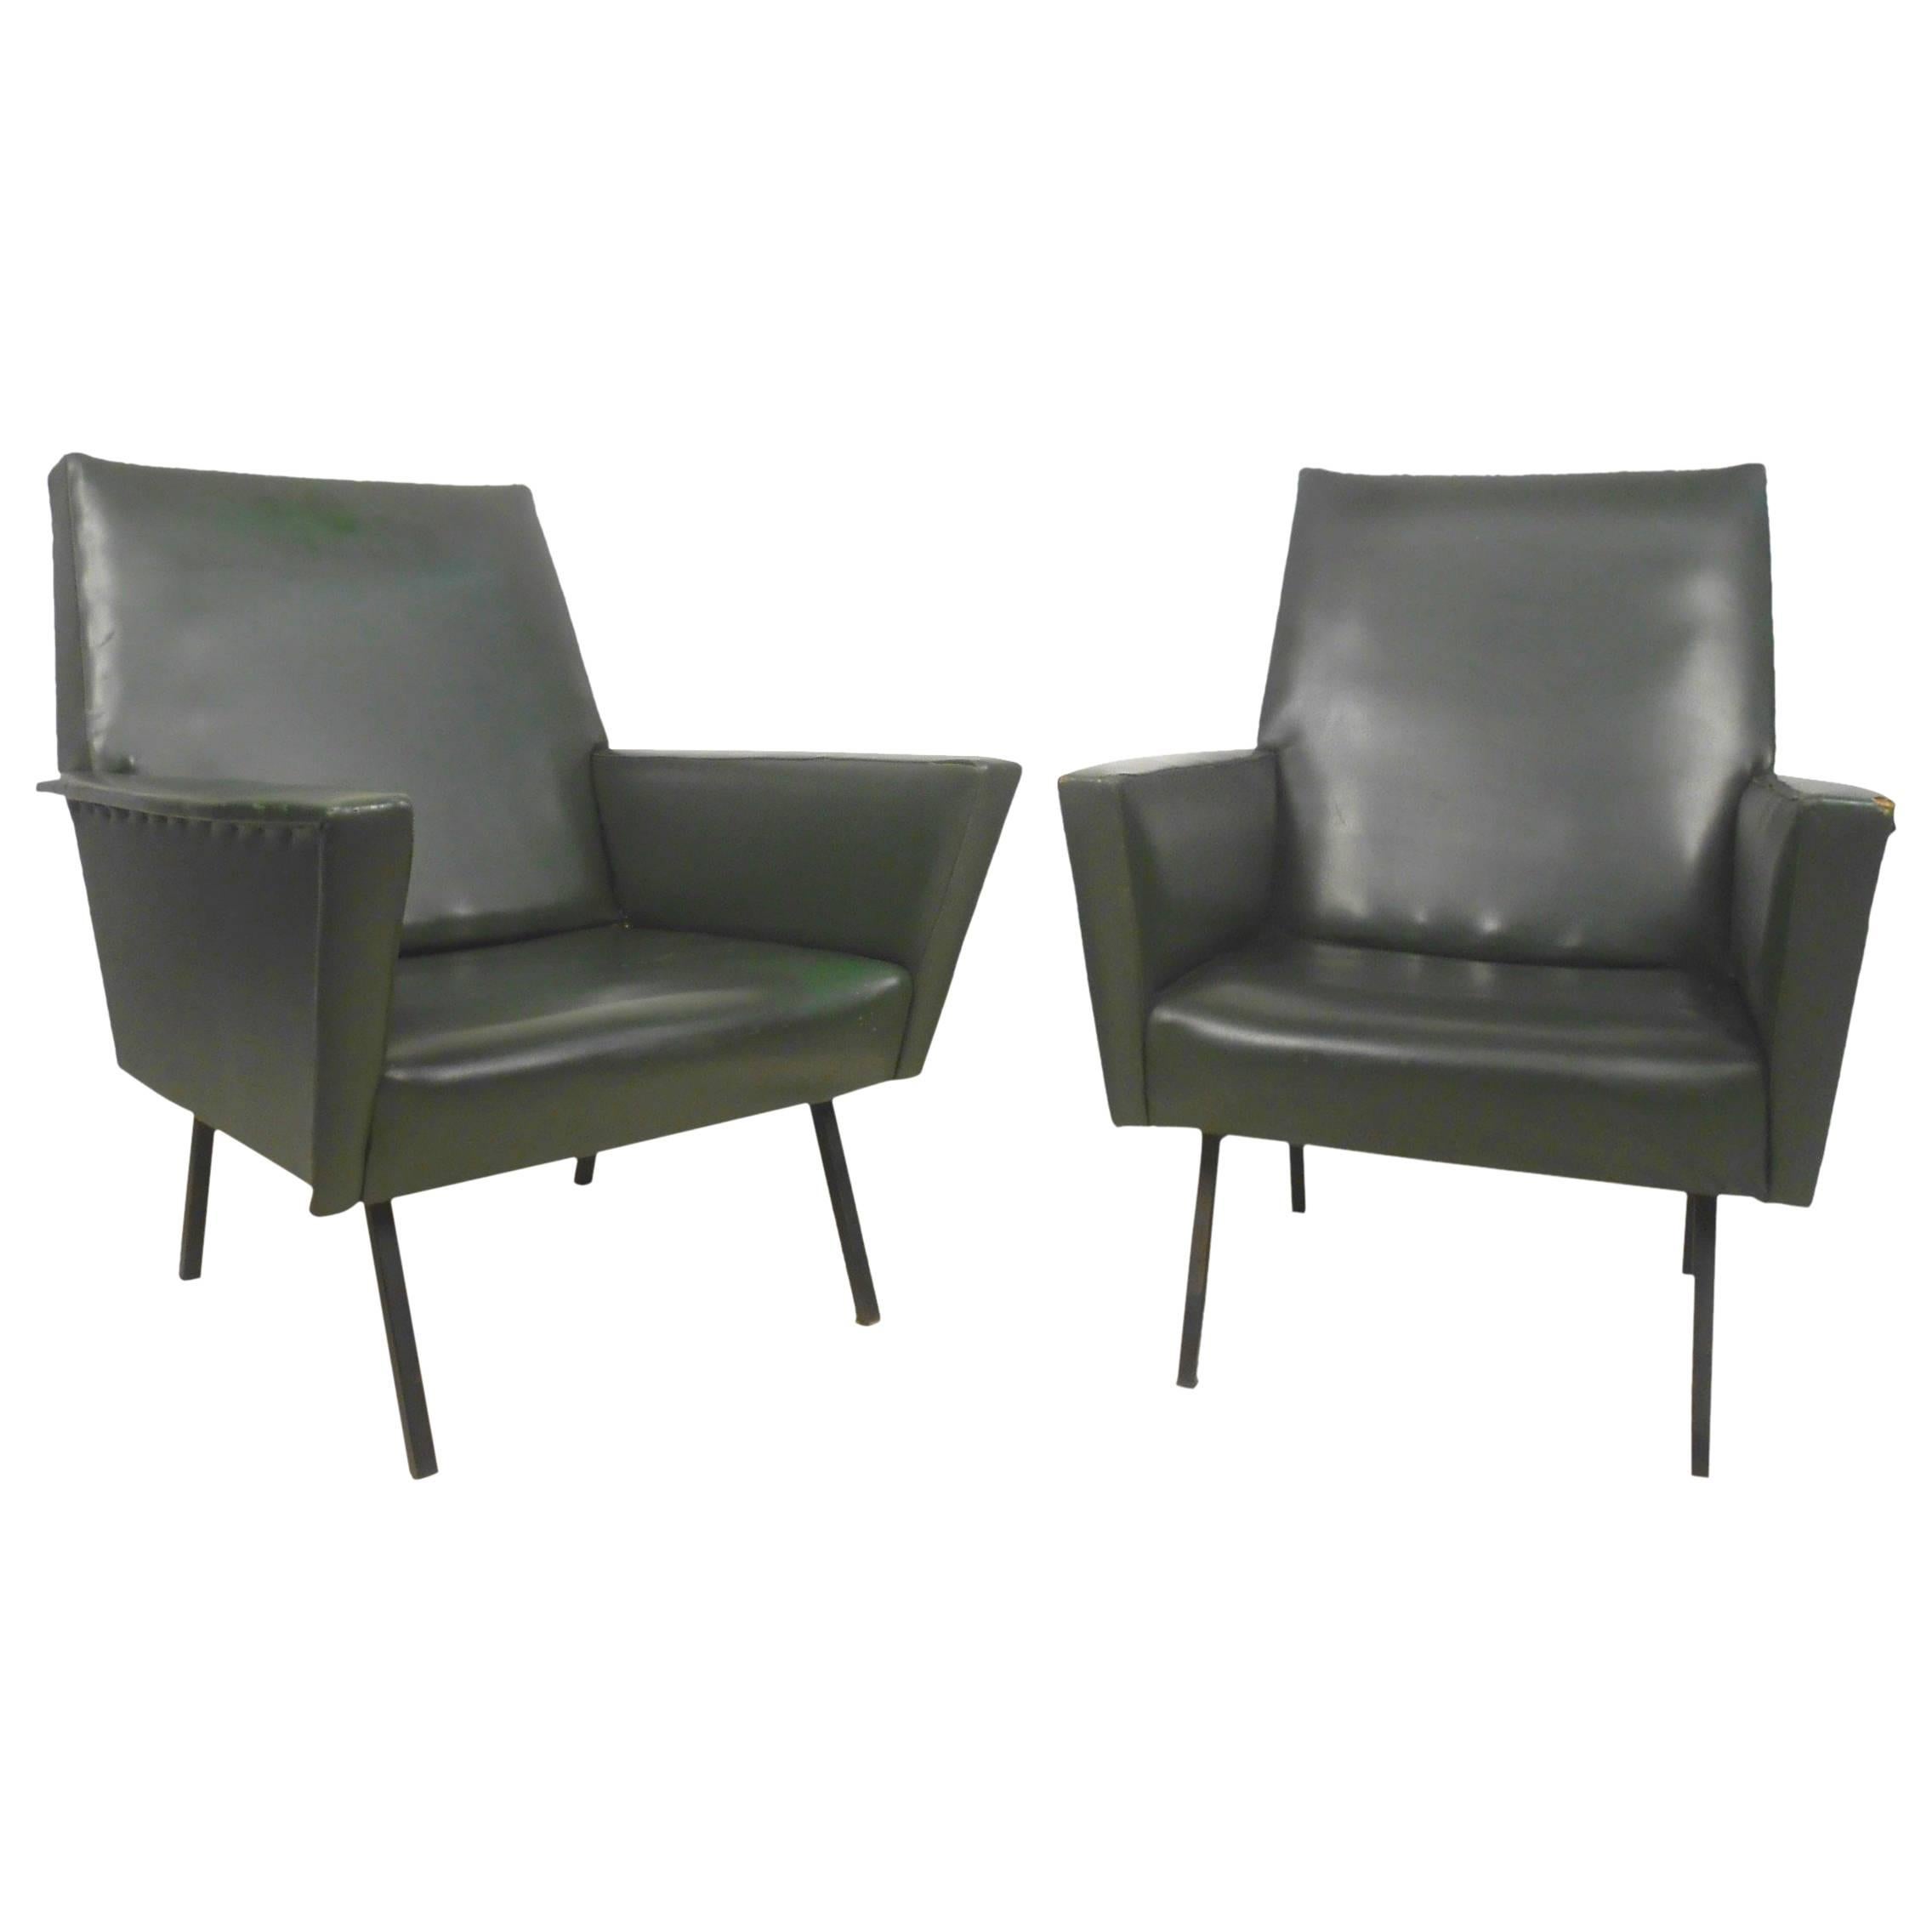 Pair of Vintage Modern Winged Arm Lounge Chairs